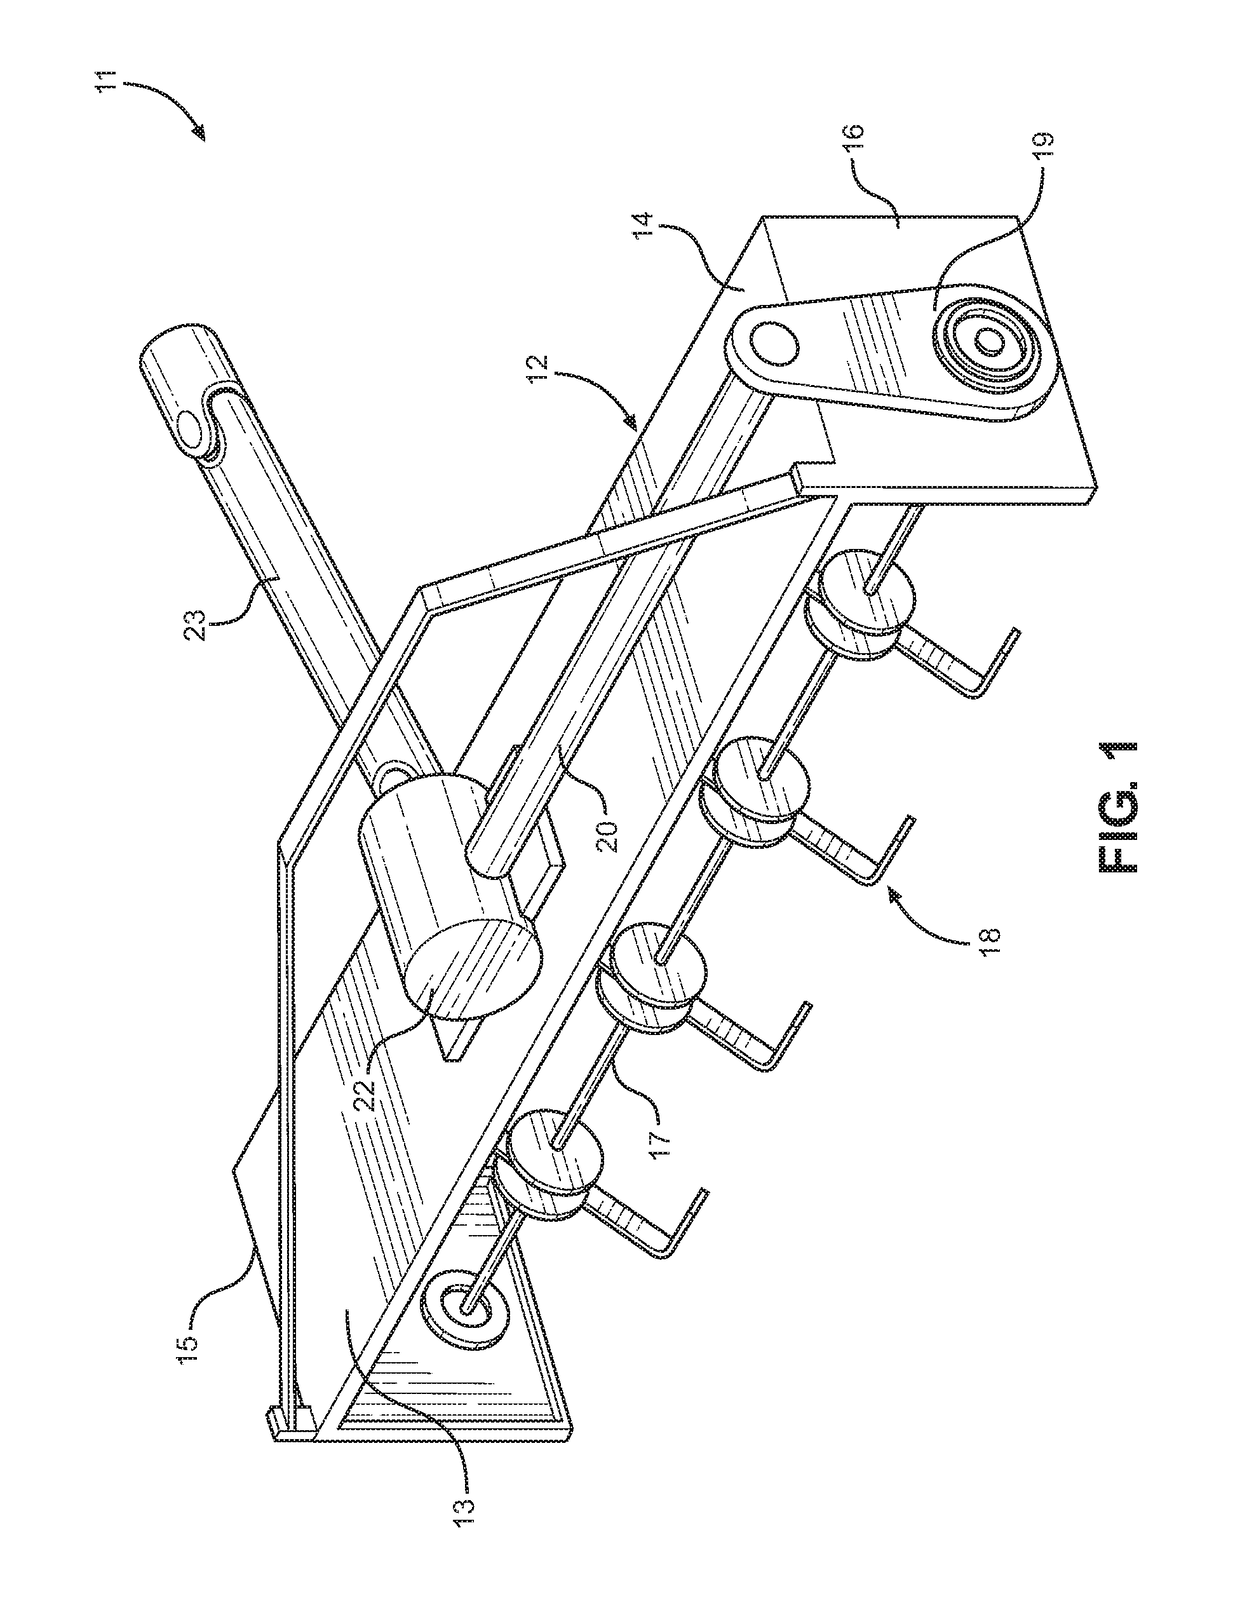 Attachable tilling device